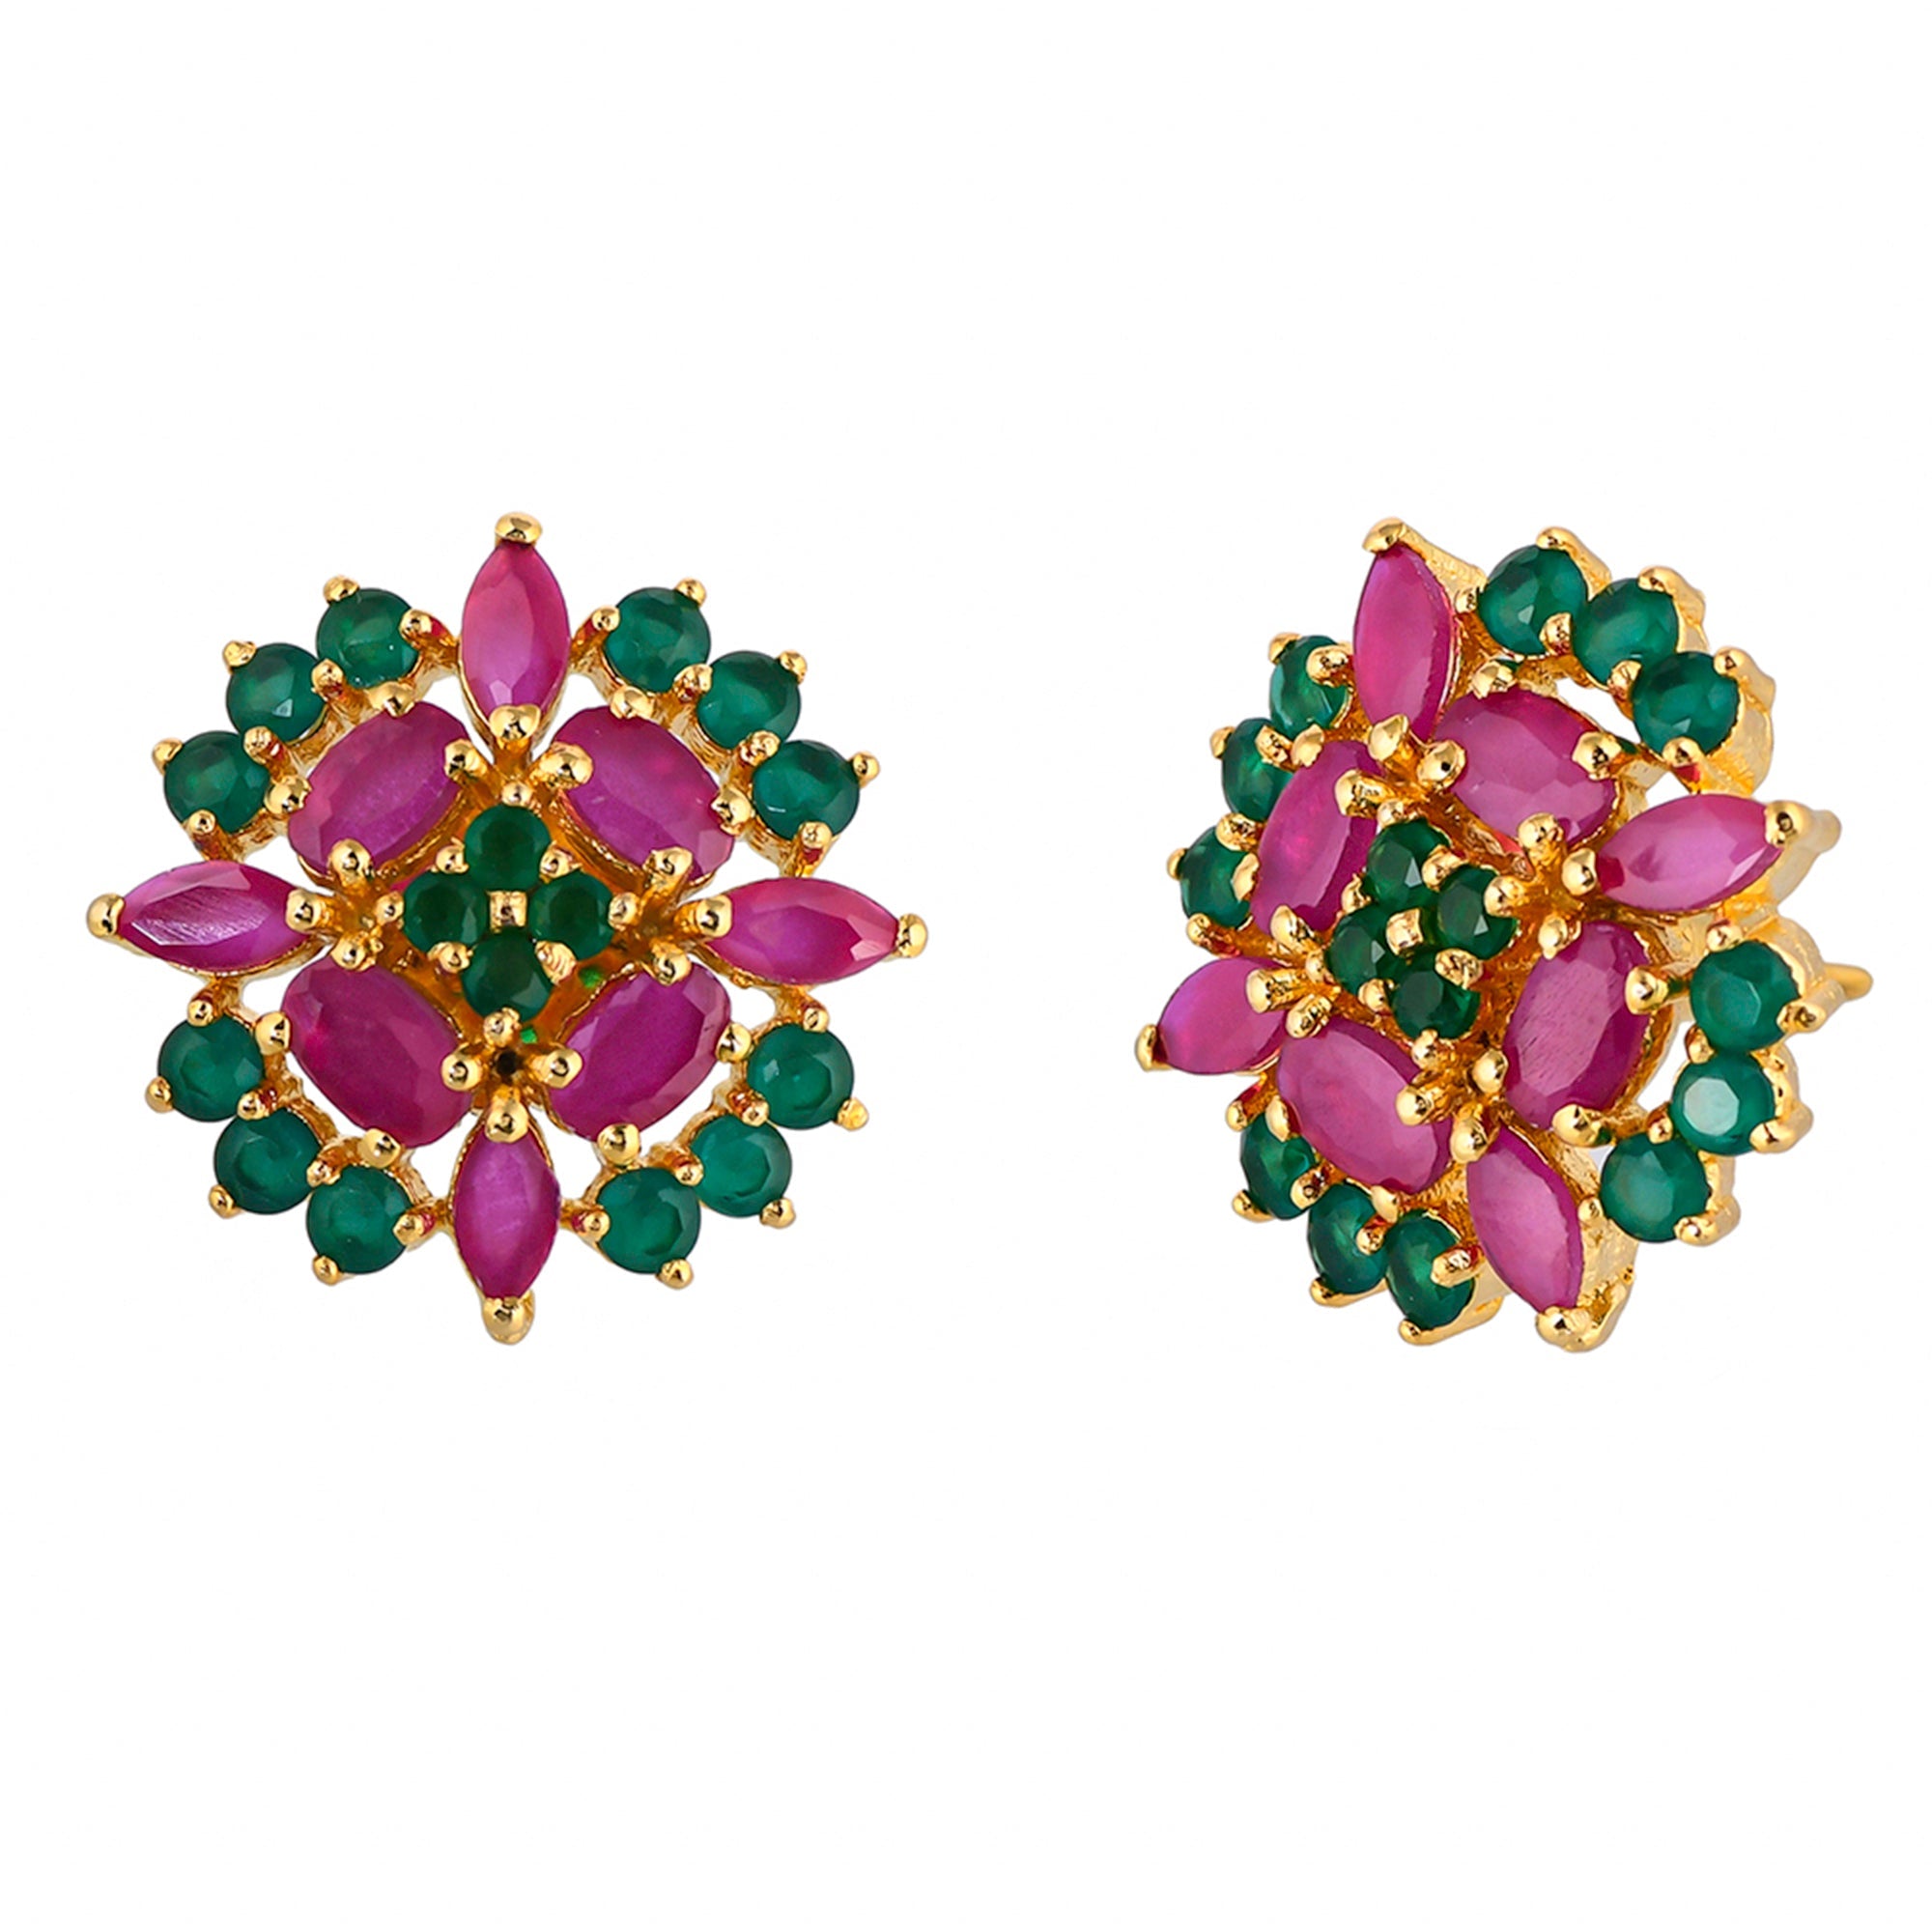 Women's Cluster Setting Pink And Green Cz Gems Stud Earrings - Voylla